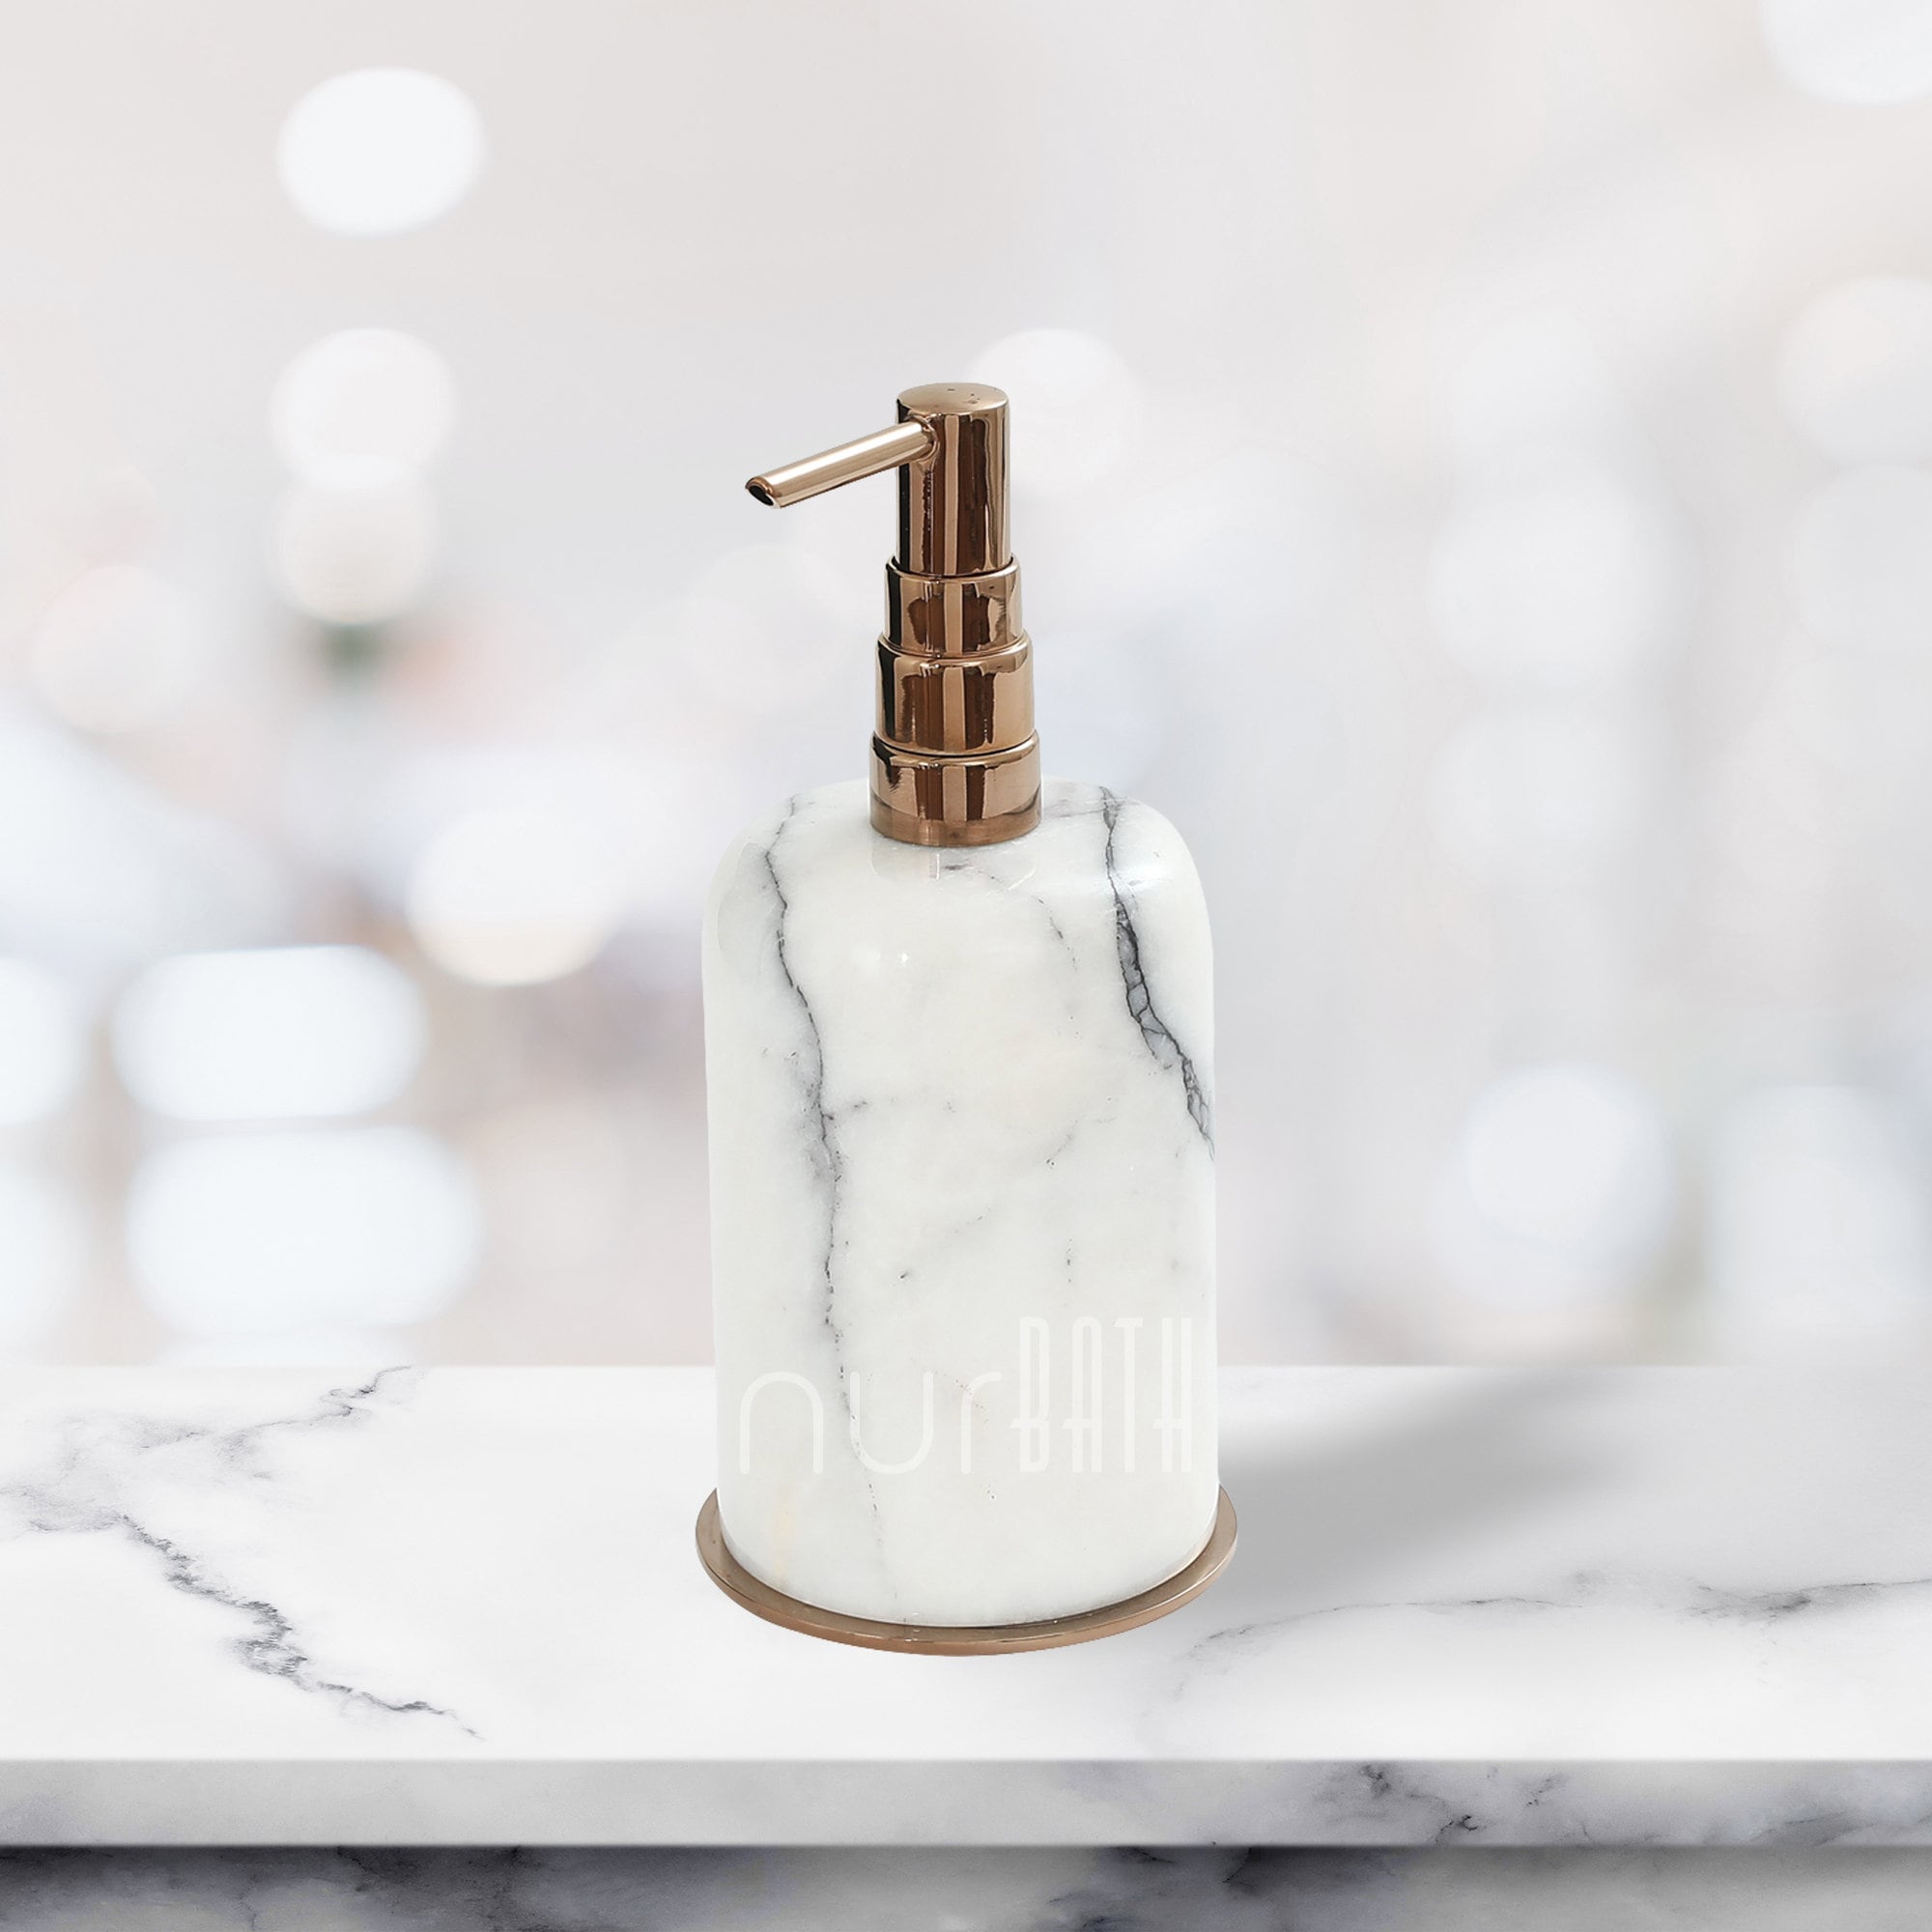 White Marble Dish Soap and Lotion Tray - Hudson Grace